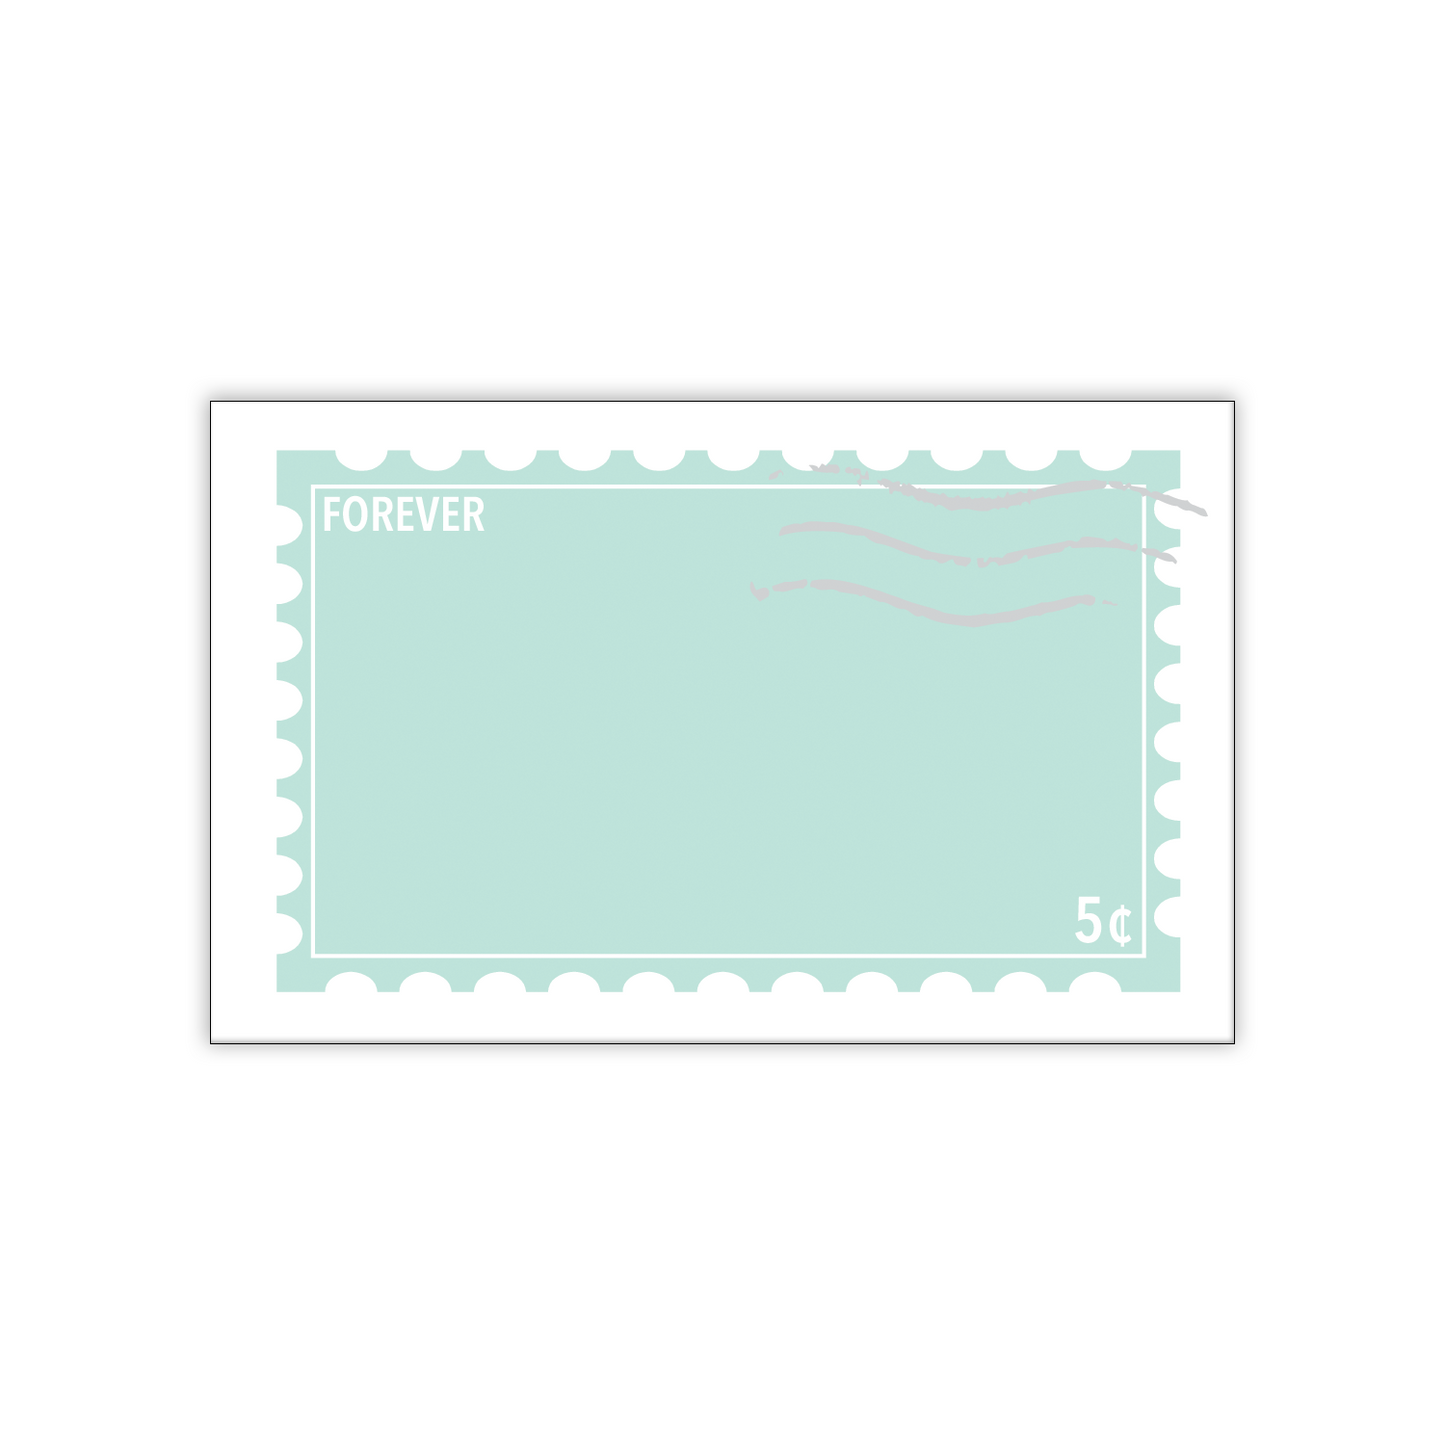 Mini Notecard Set of 60 - Seafoam Forever Stamp Flat Cards - Lunch Notes - Mini Cards - Enclosure cards